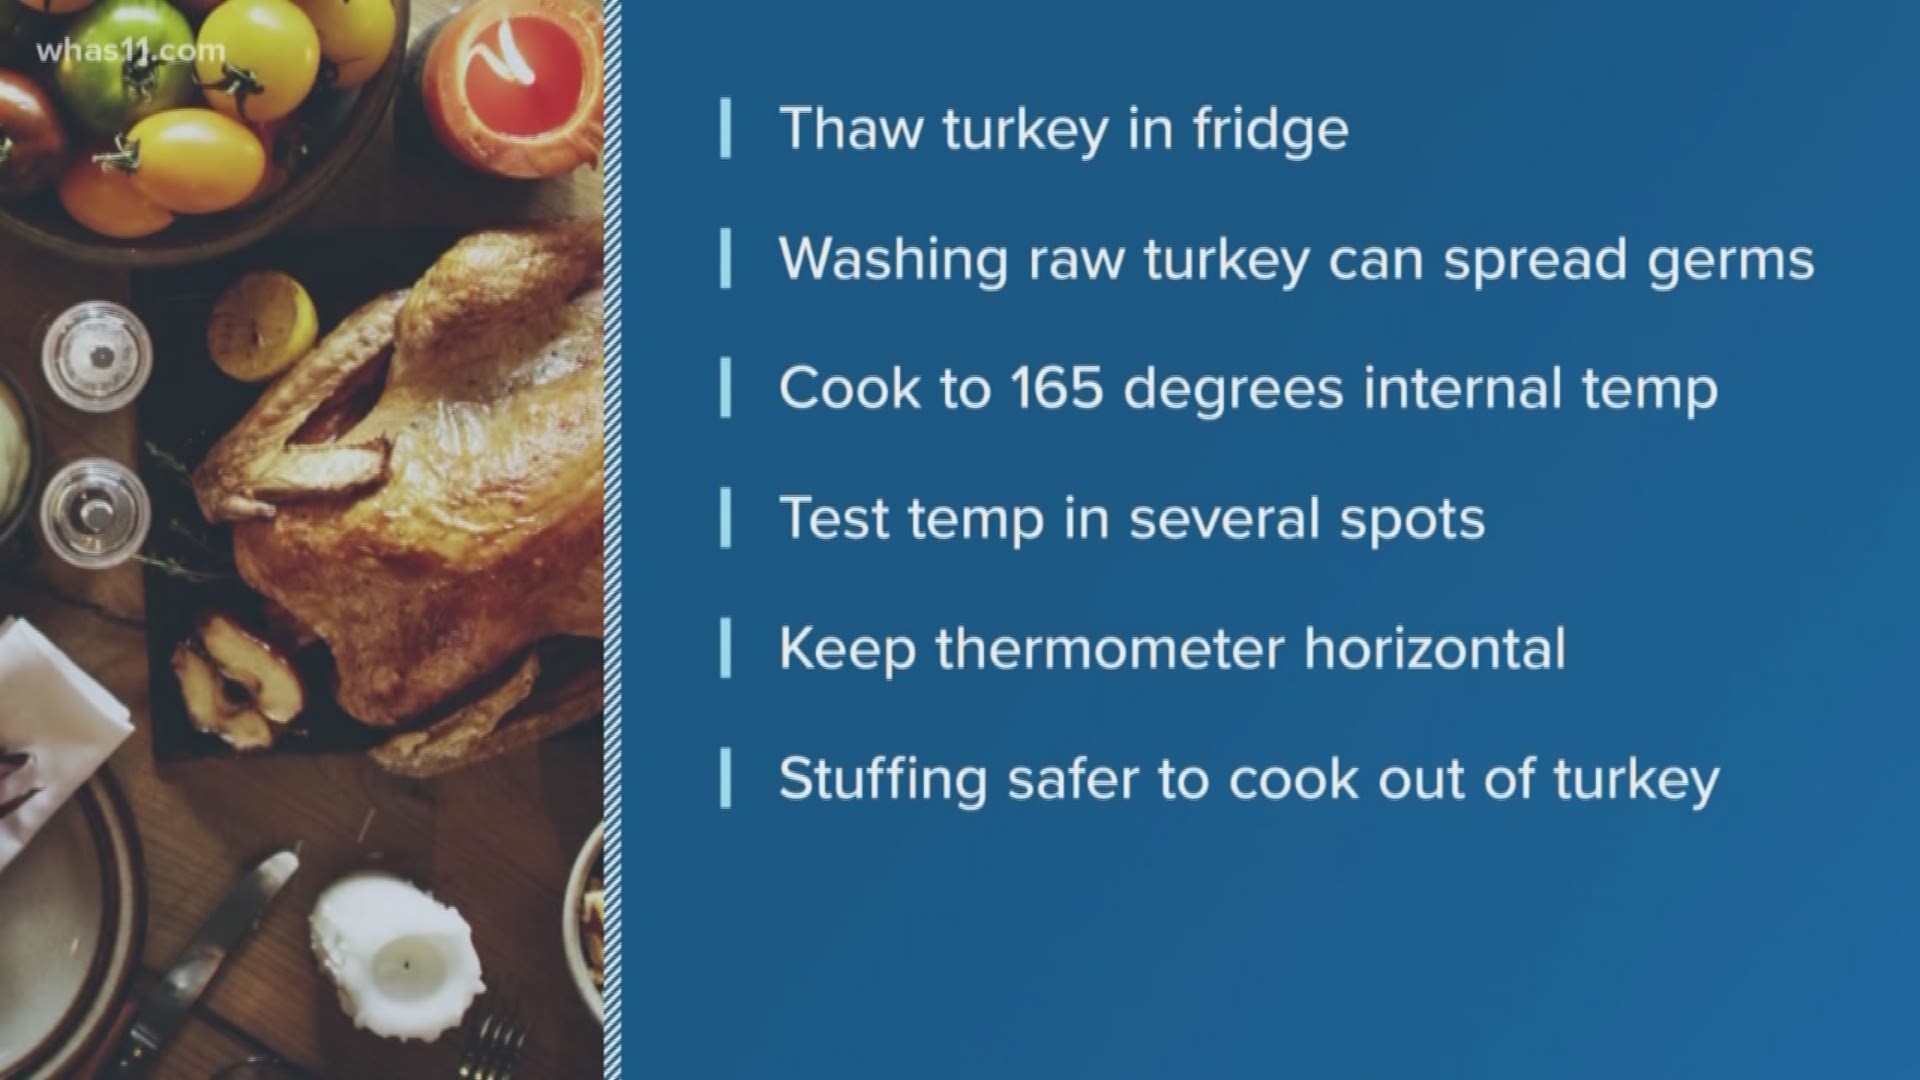 How to Prepare a Turkey for Thanksgiving - Turkey Roasting Tips